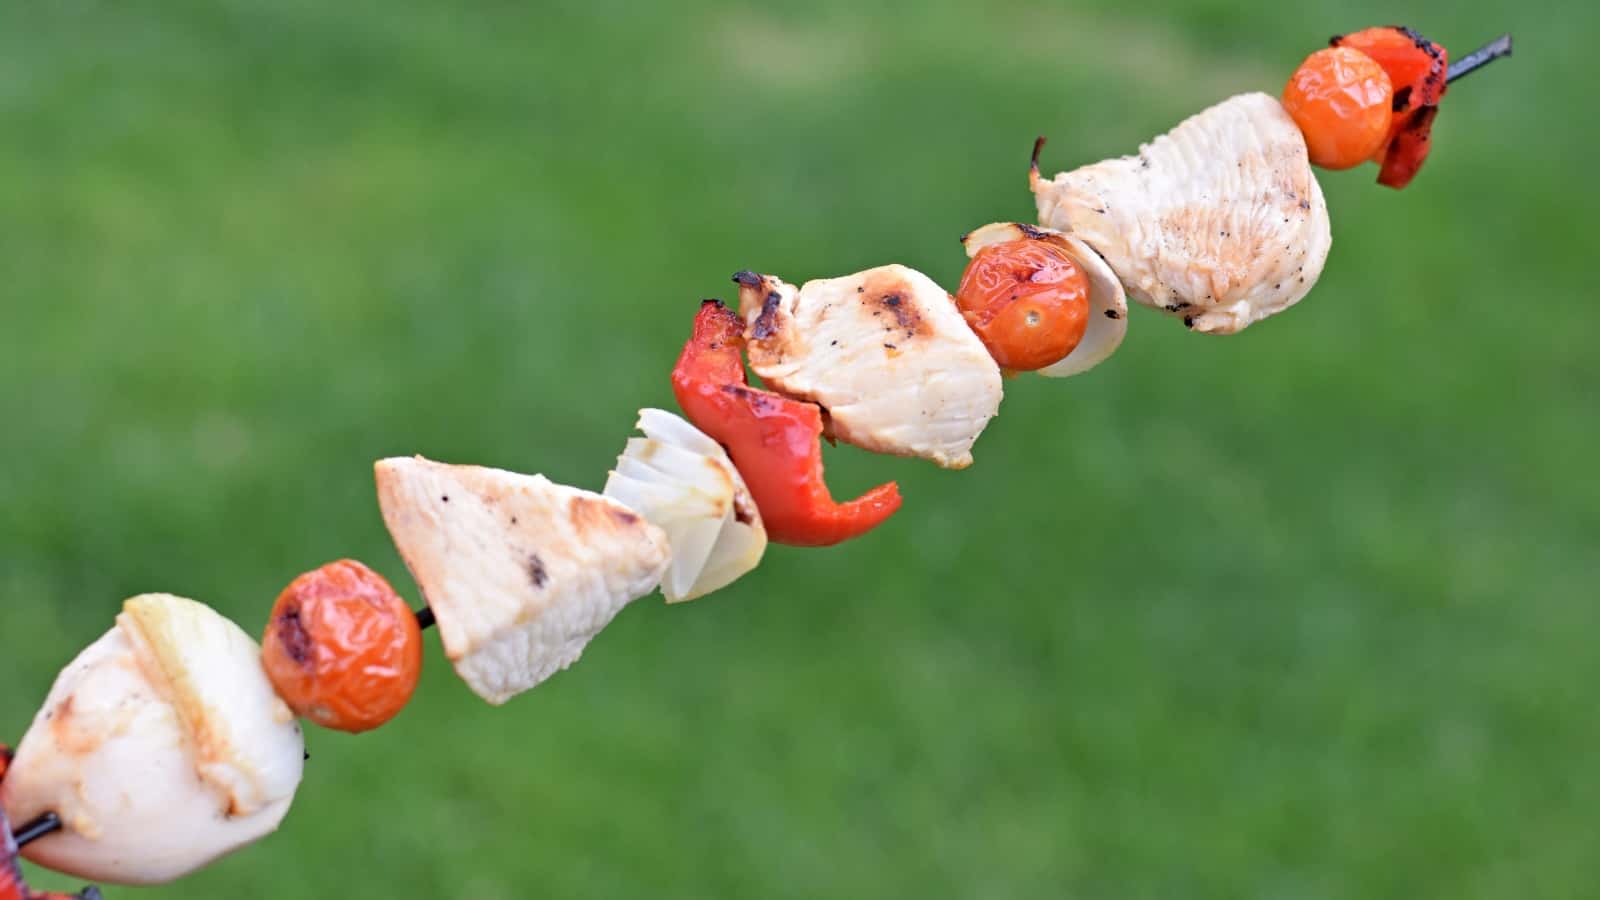 Image shows a skewer of lemon marinated chicken held diagonally with green grass in the background.